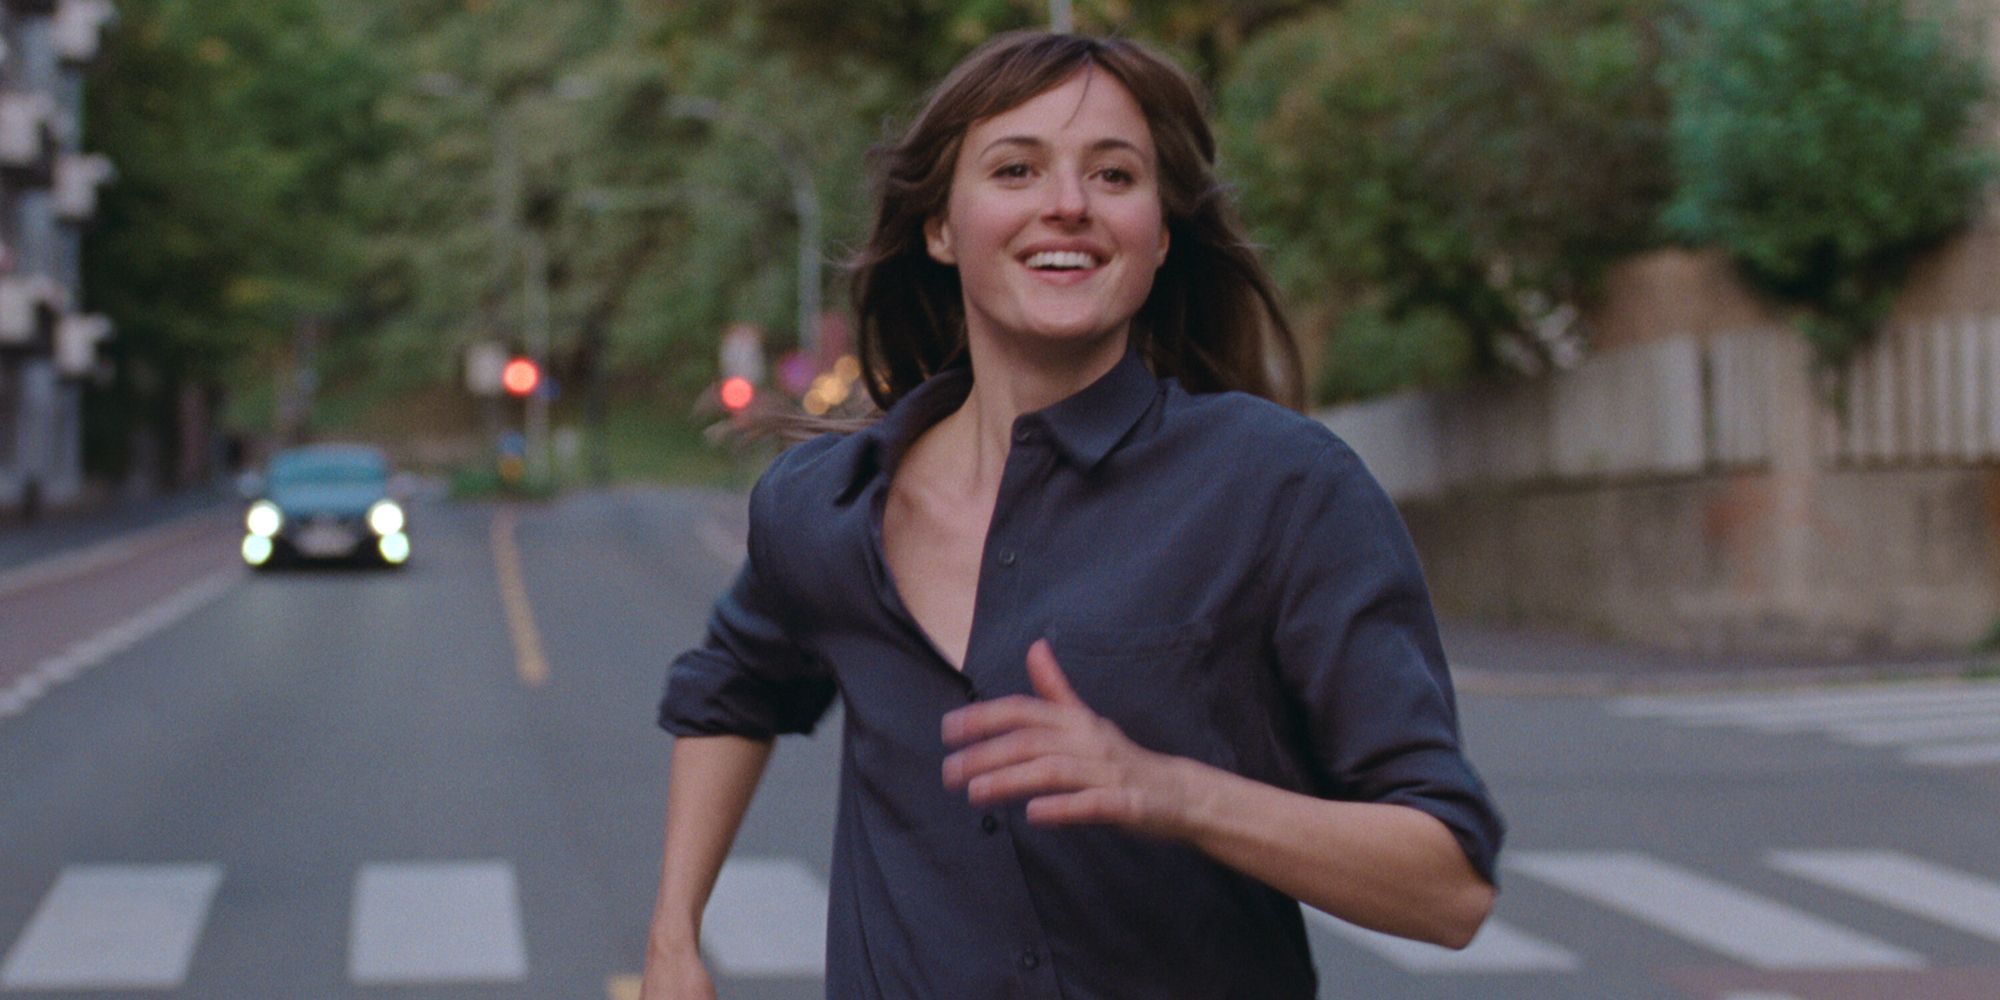 Renate Reinsve as Julie running down the street in The Worst Person in the World